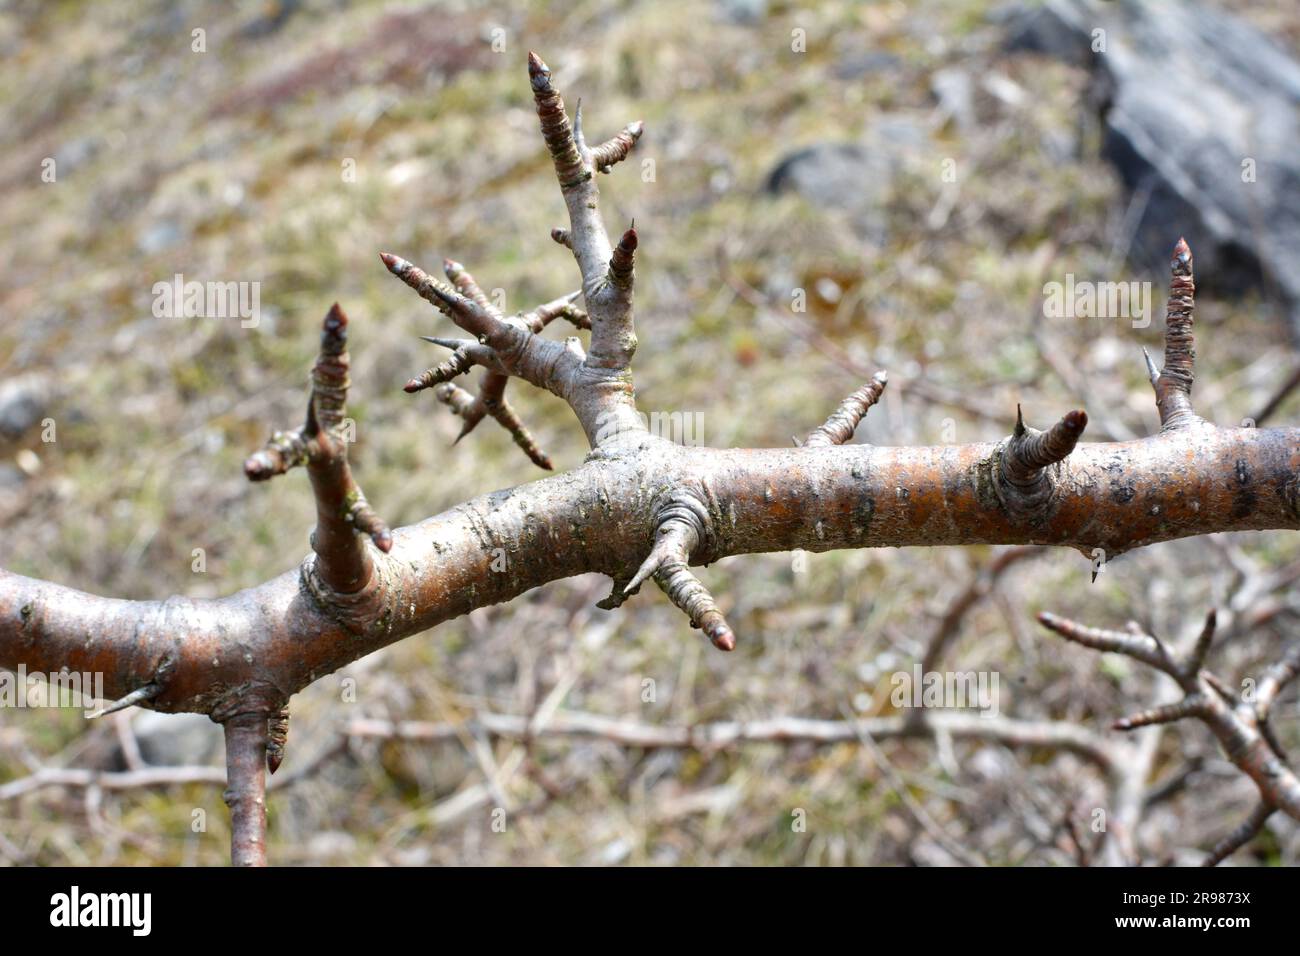 Sharp thorns on a branch of a bush and a tree close up Stock Photo